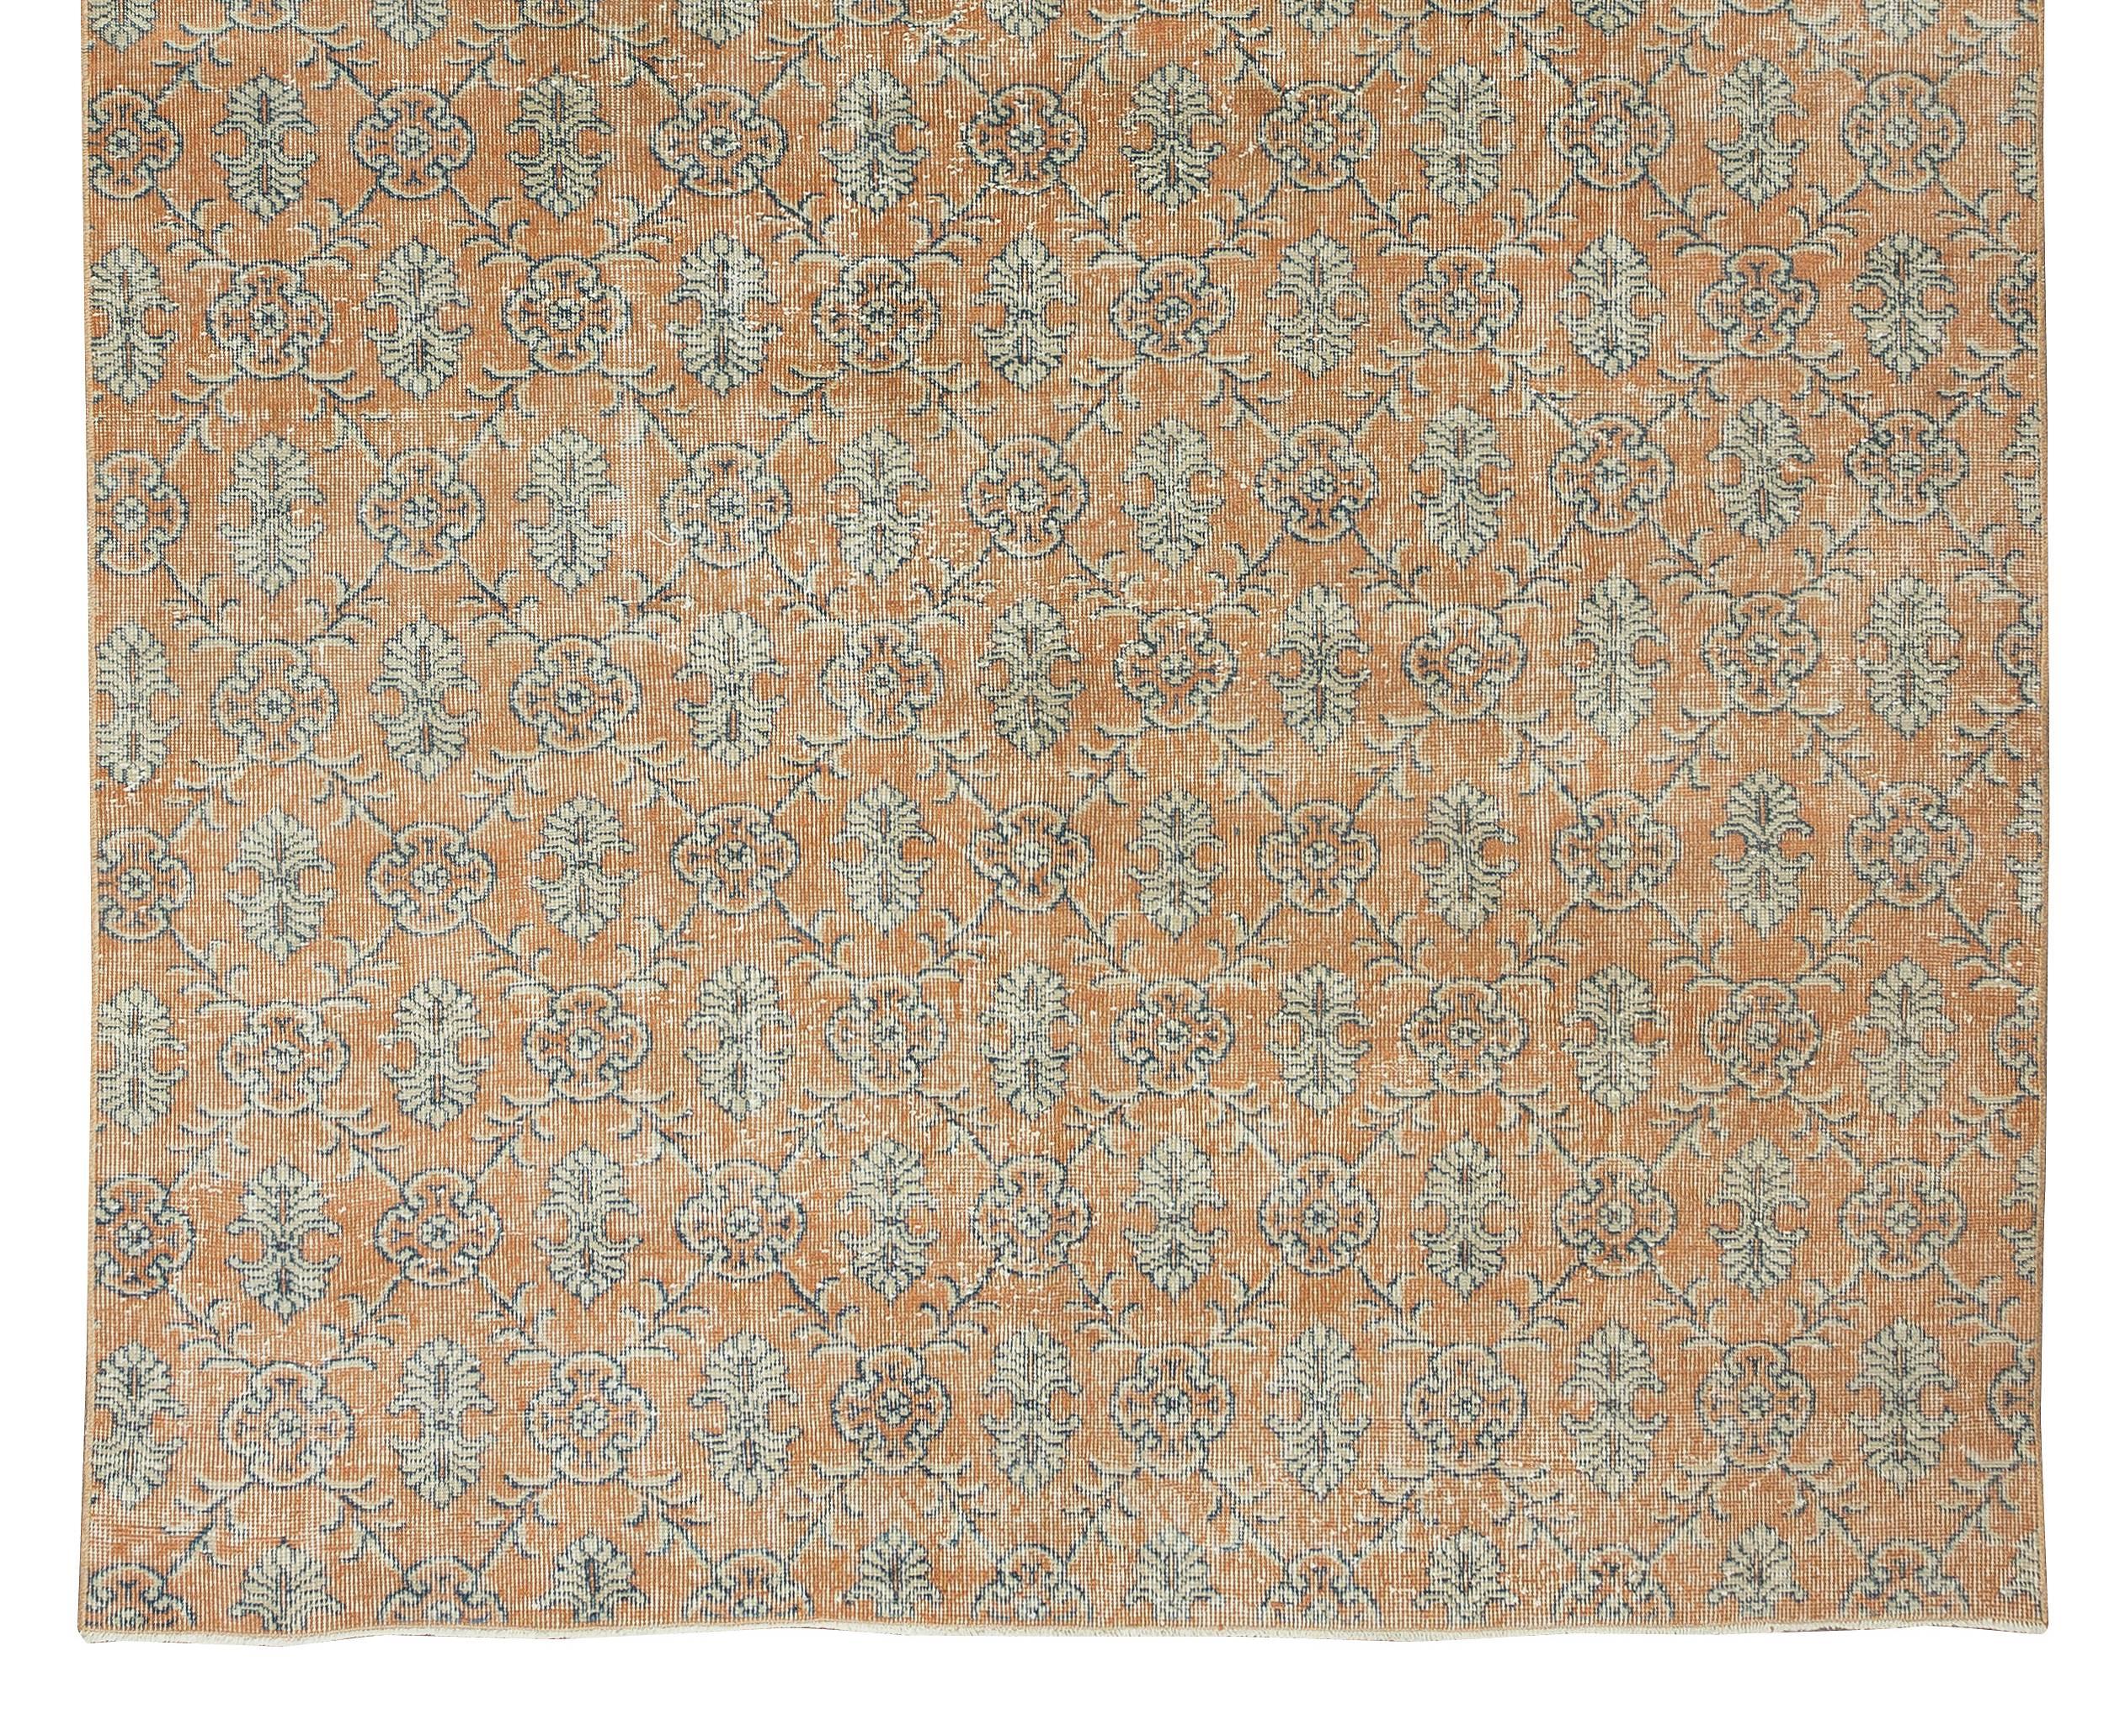 Hand-Knotted 6.4x10.5 Ft Vintage Floral Pattern Handmade Anatolian Wool Area Rug in Orange For Sale